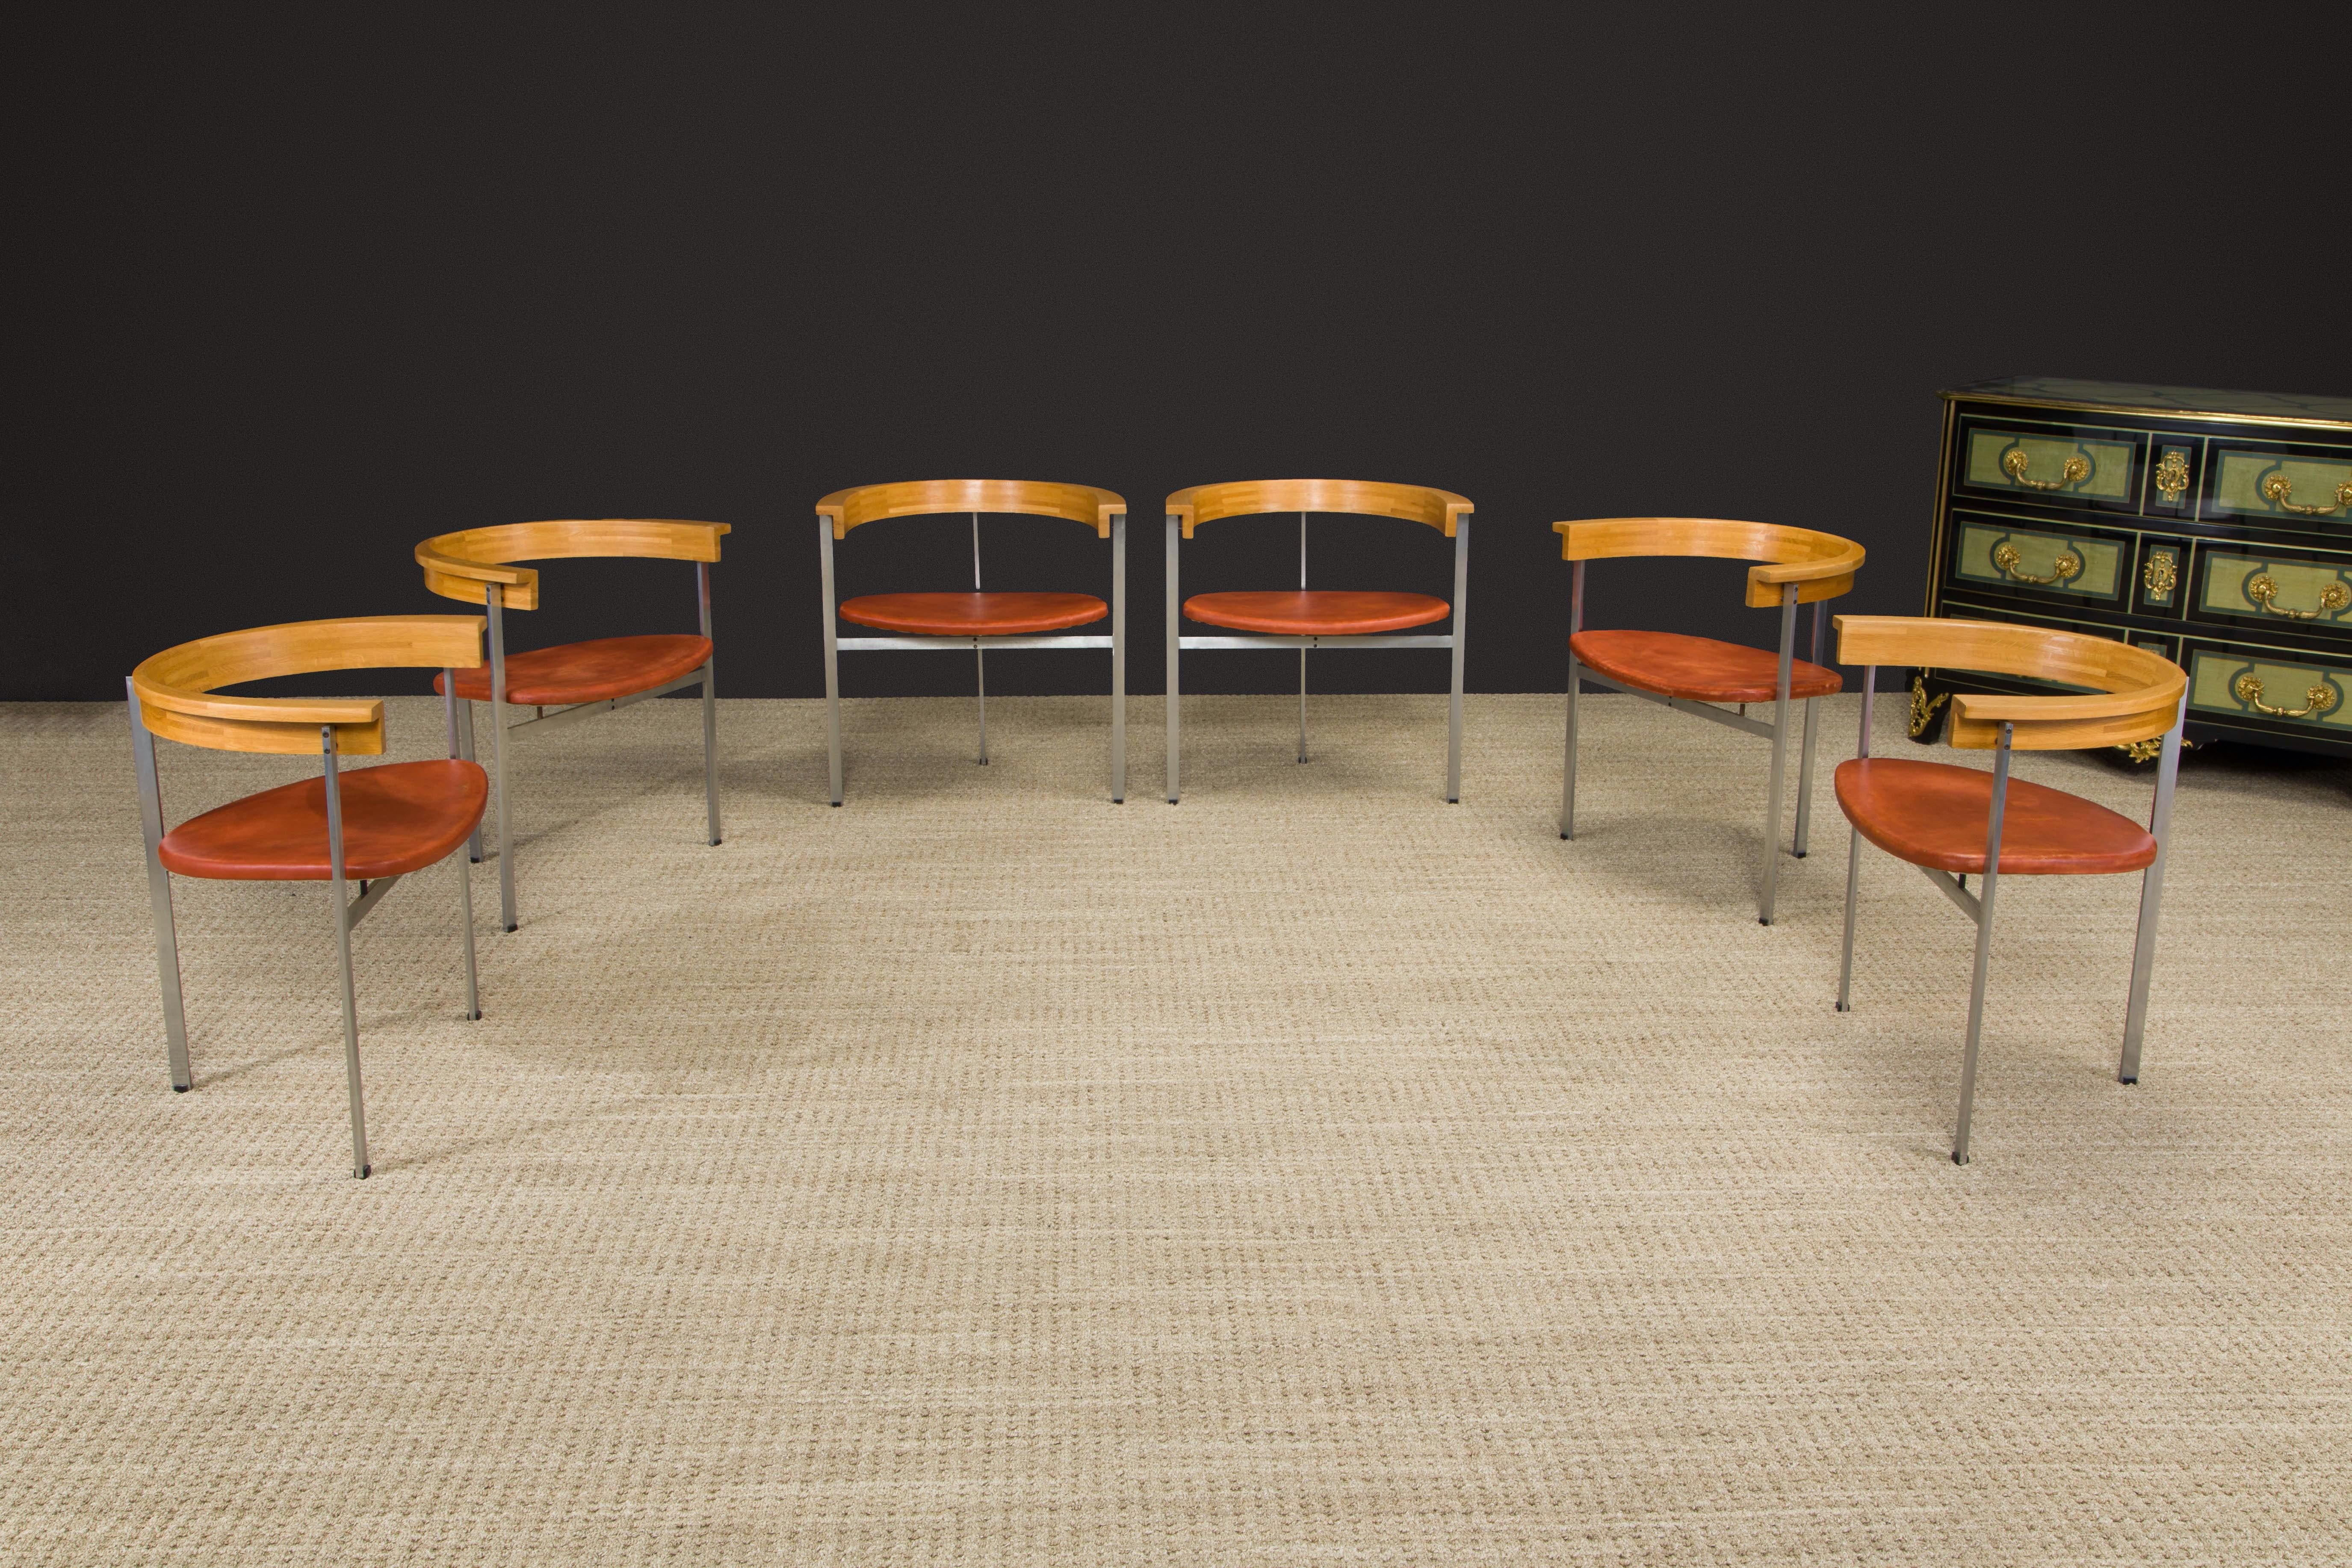 Mid-20th Century 'PK-11' Armchairs by Poul Kjærholm for EKC, Set of Six, Denmark c. 1957, Signed For Sale